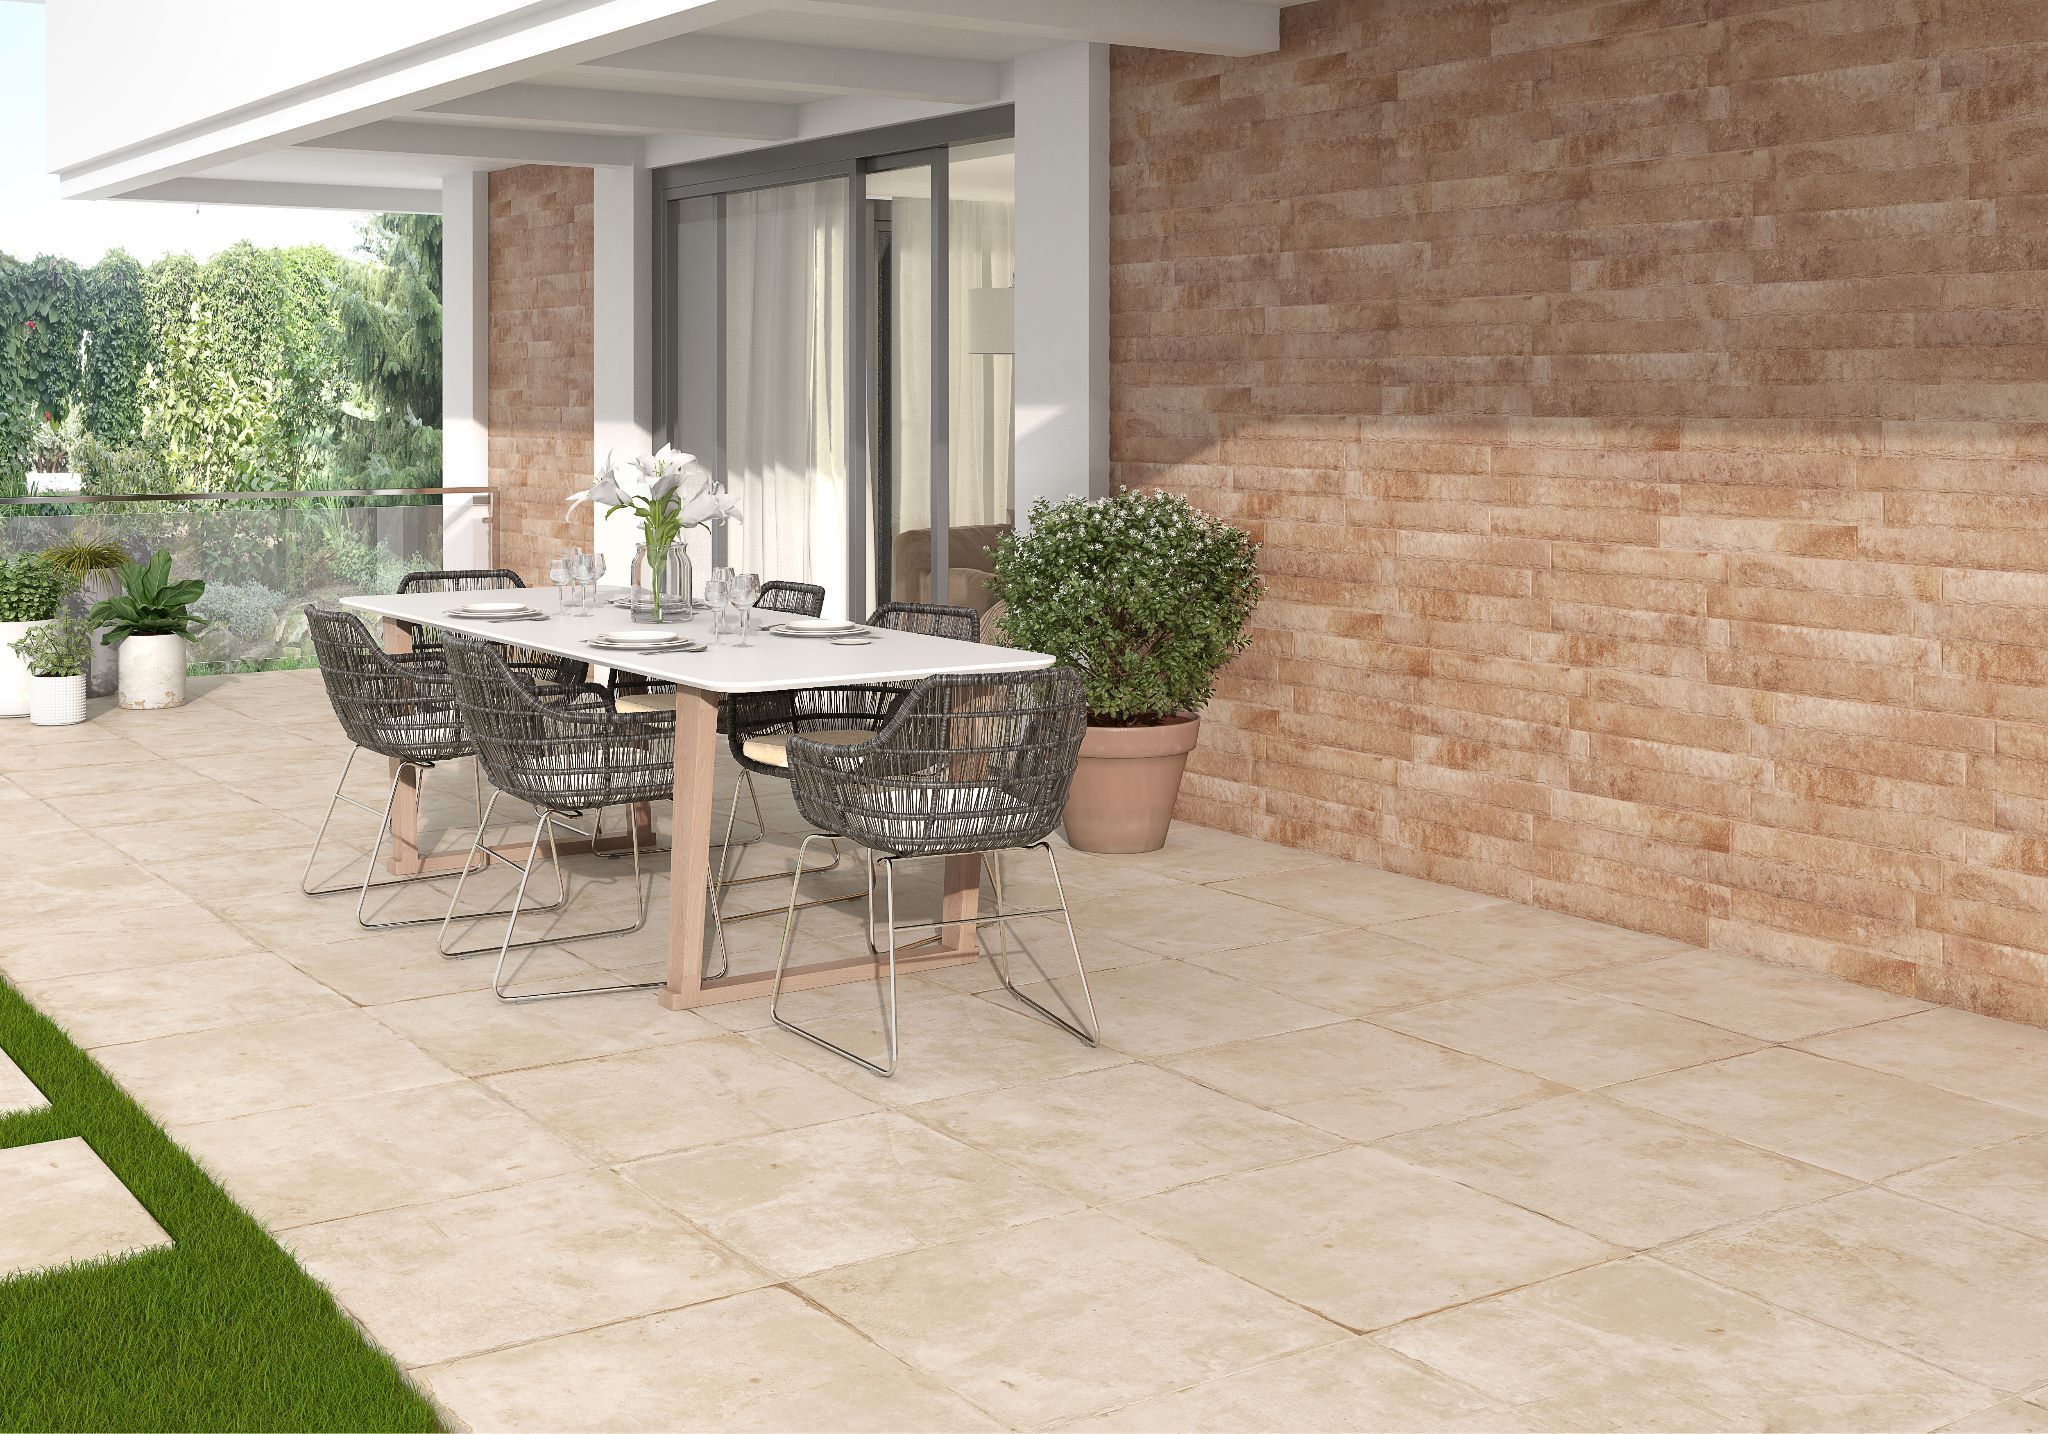 Kano Beige | Stones & More | Finest selection of Mosaics, Glass, Tile and Stone